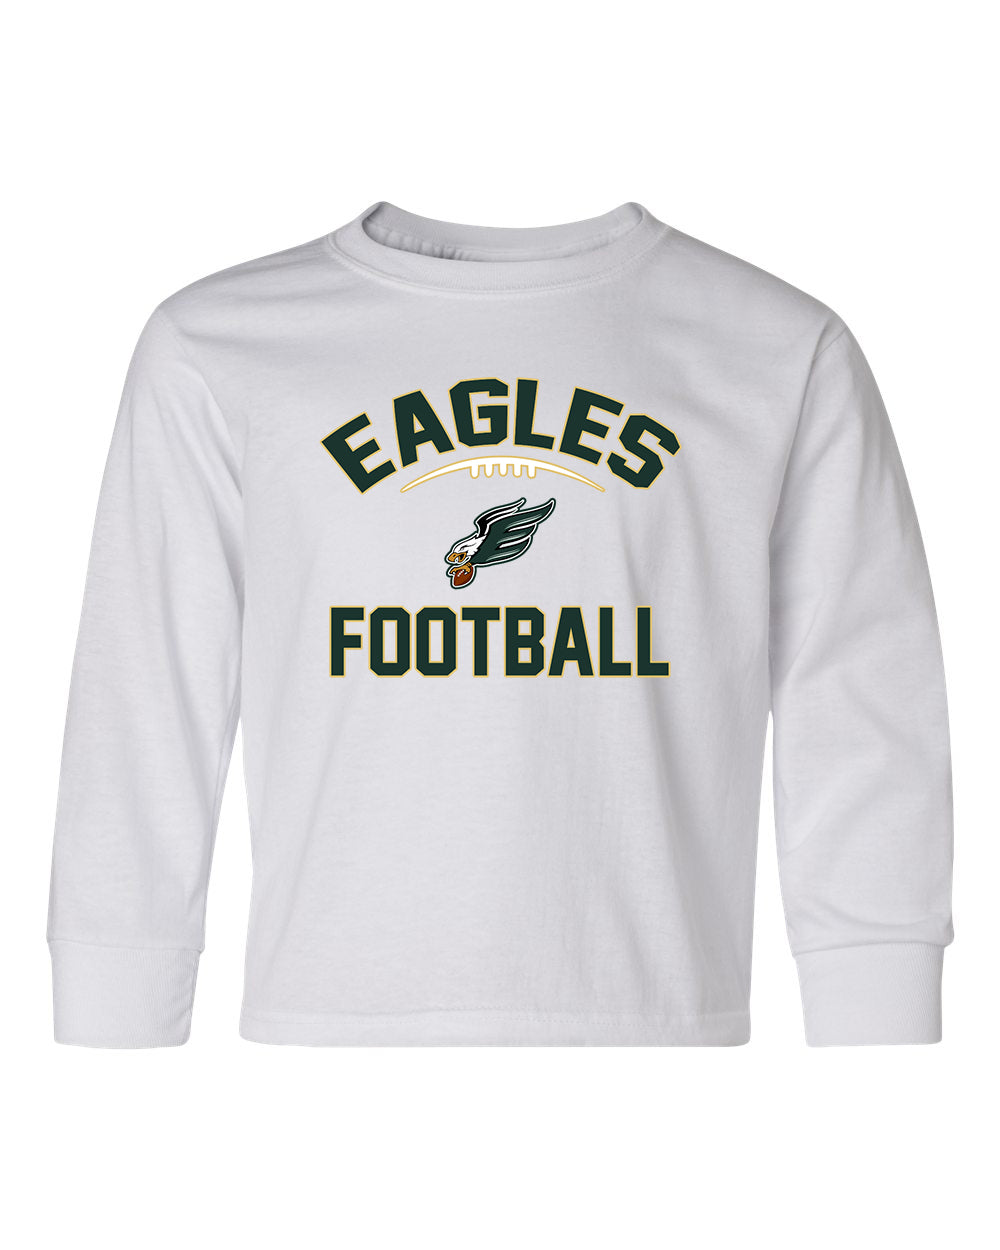 Enfield Eagles Football Youth Longlseeve T-shirt "Classic" - 29BLR (color options available)